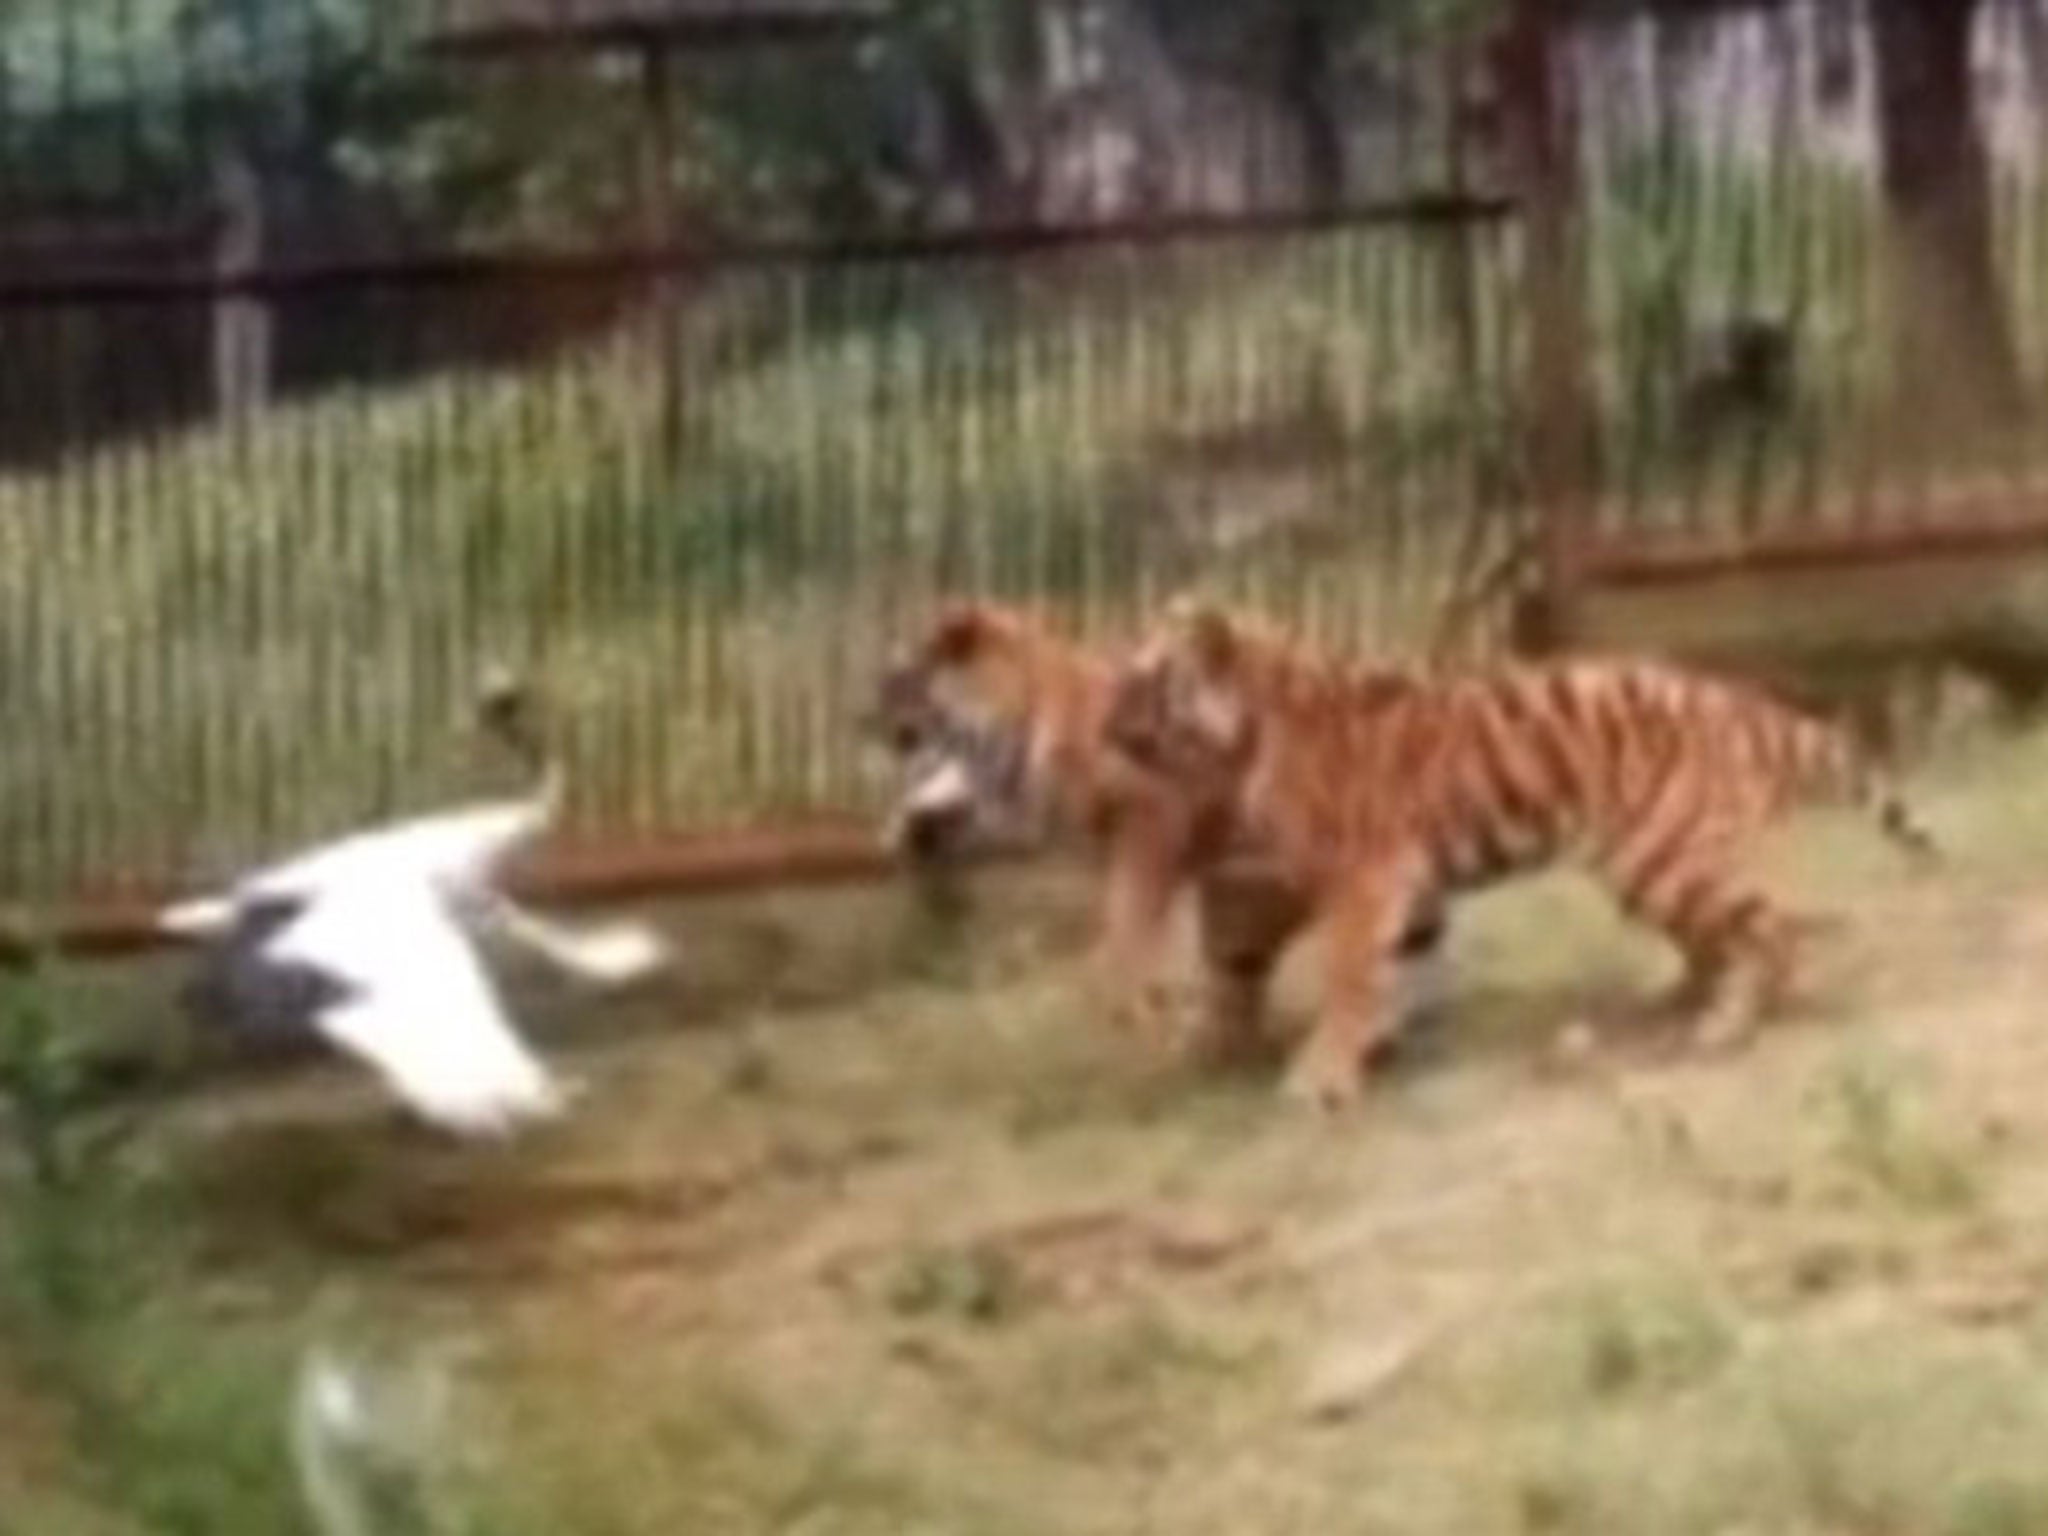 The tigers attack